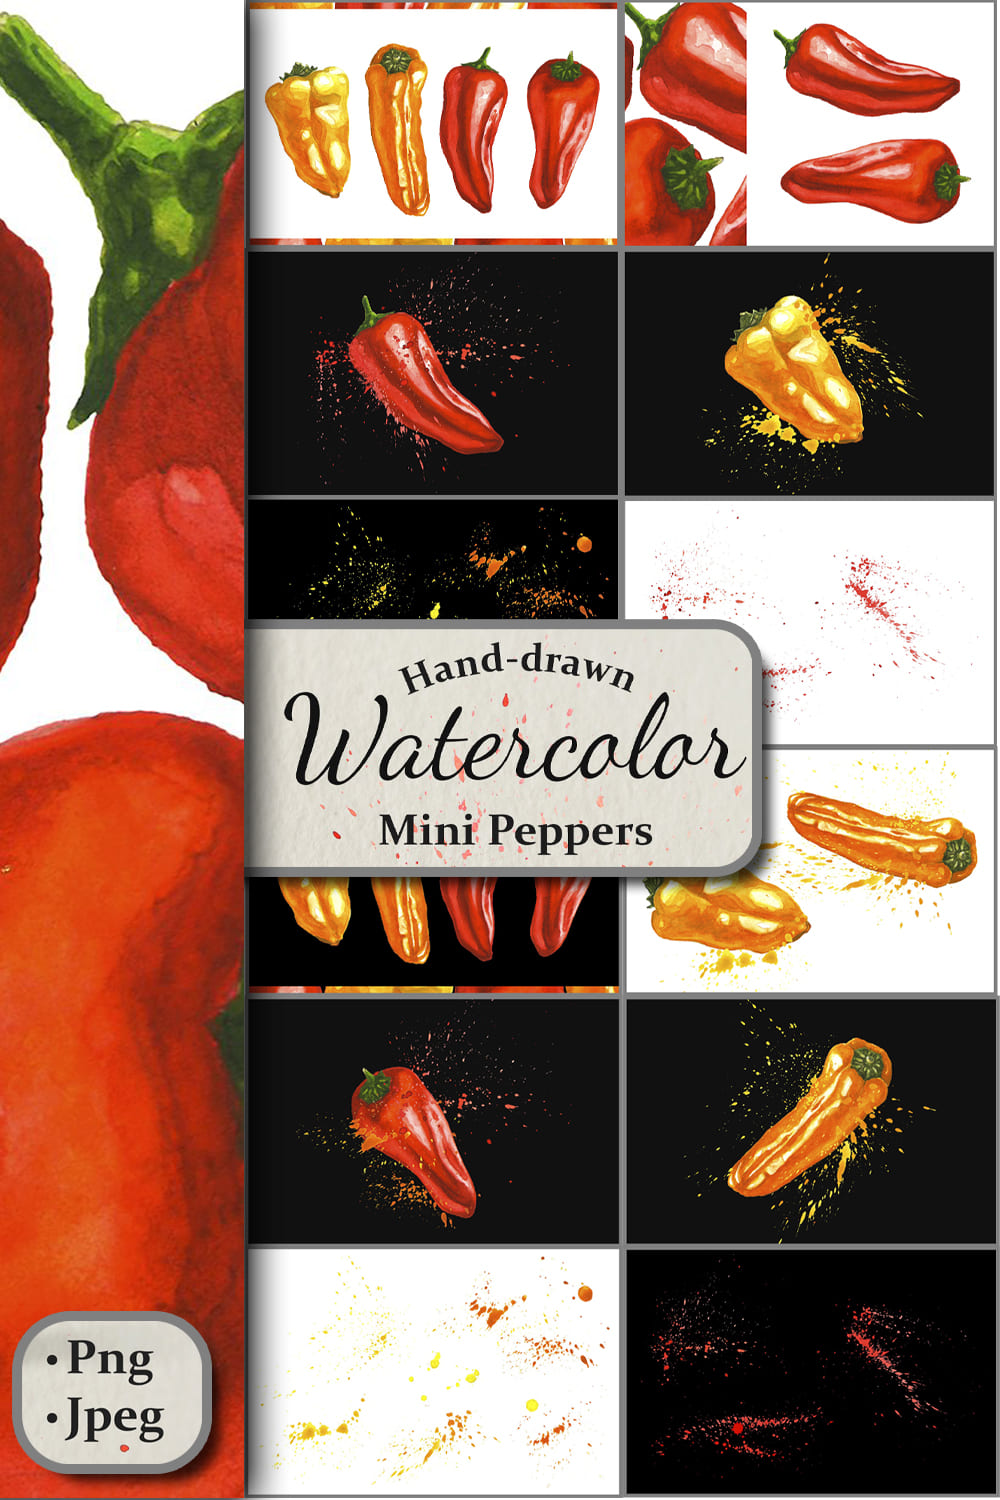 384363 mini peppers hand drawn watercolor illustrations pinterest 1000 1500